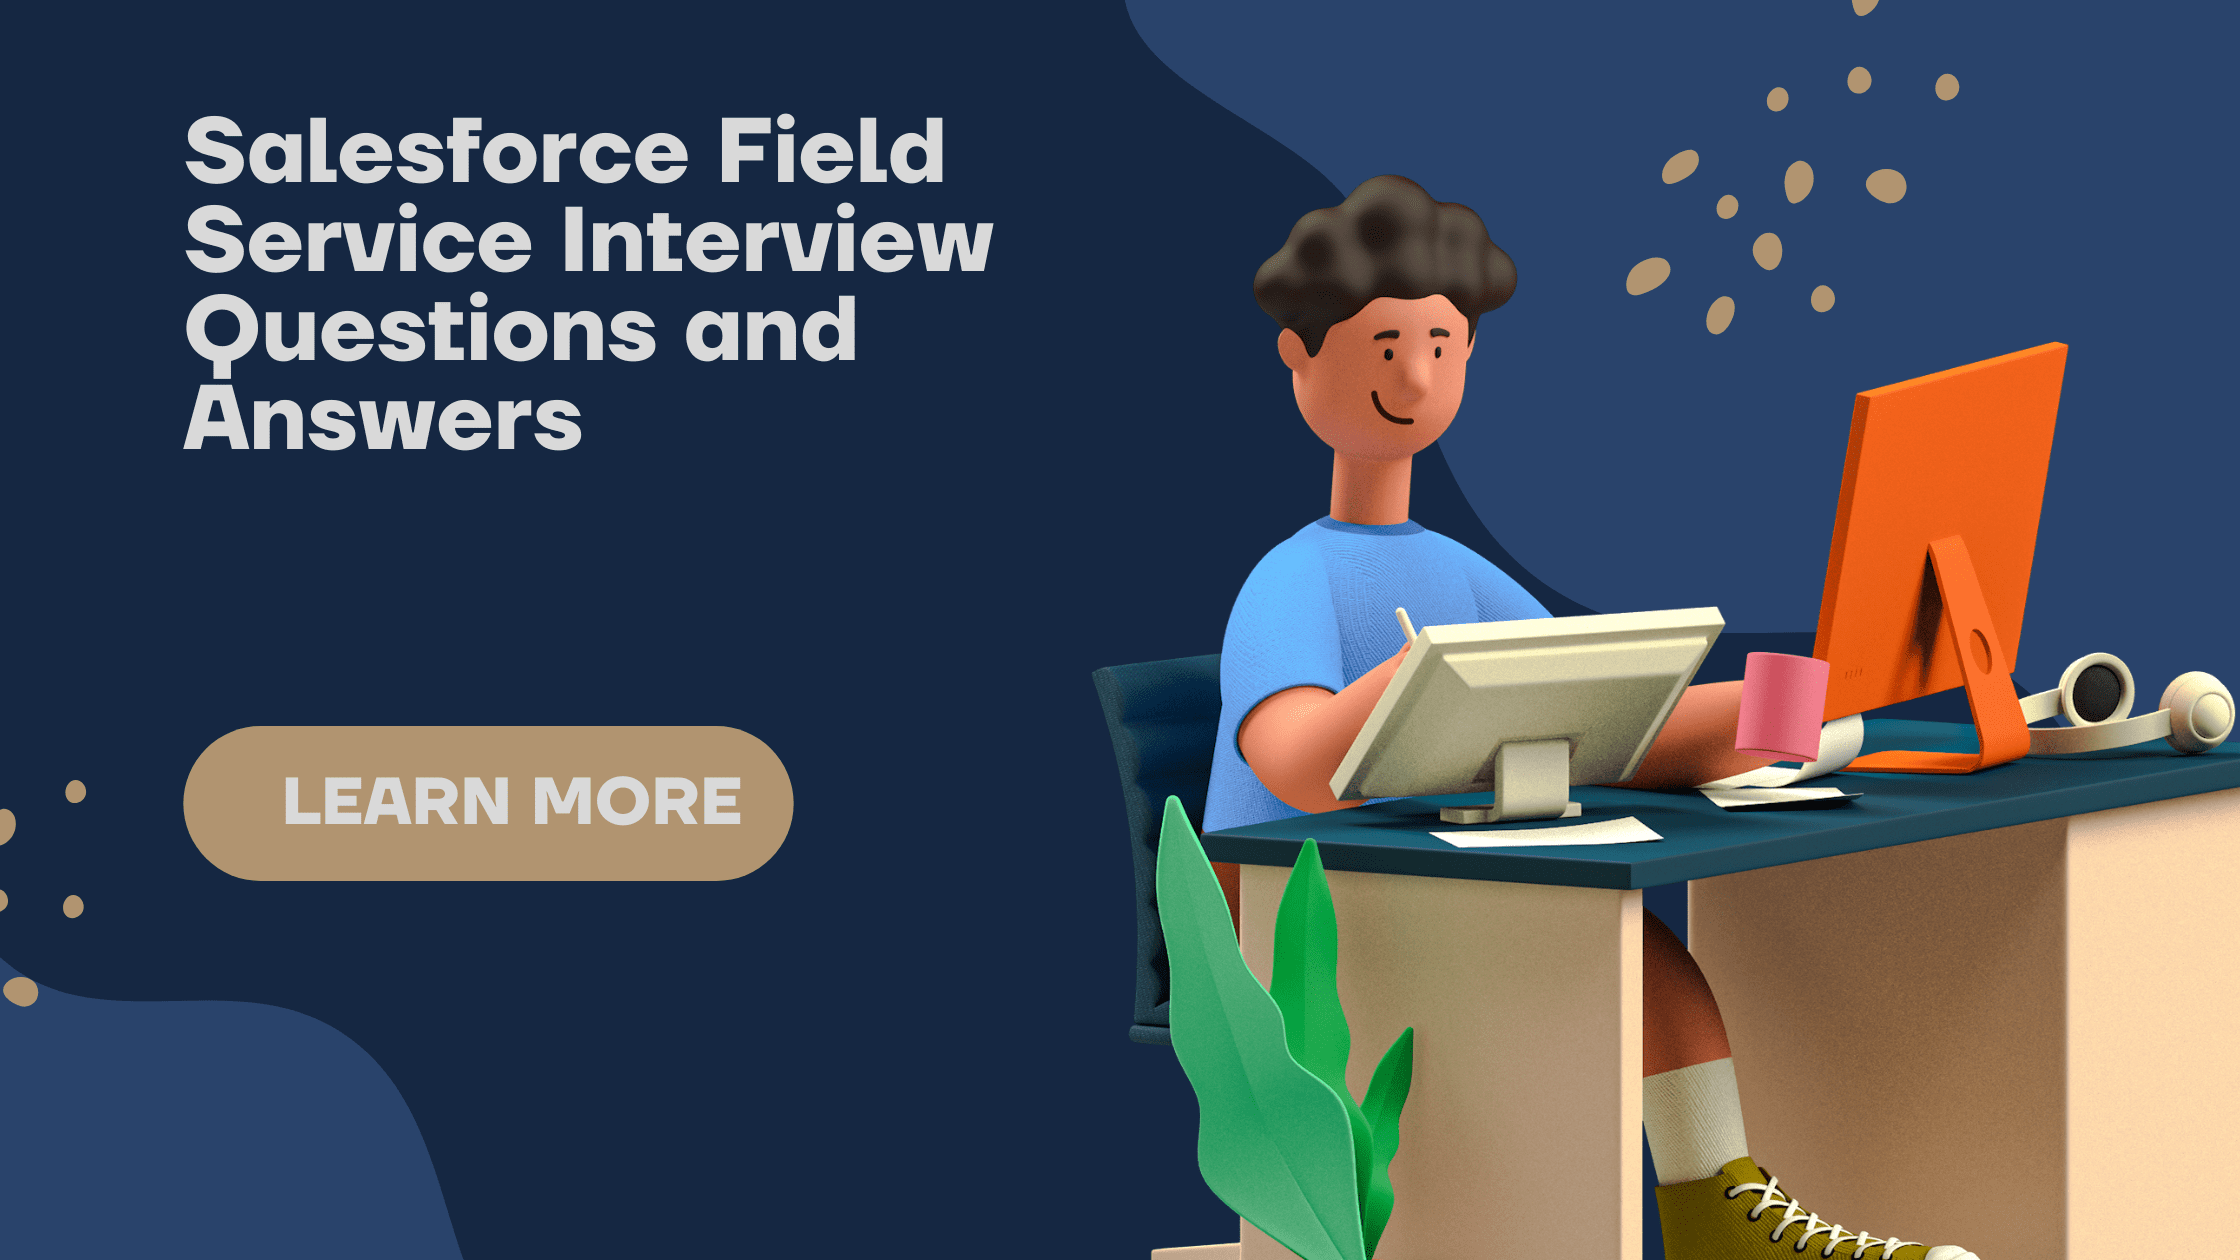 Salesforce Field Service Interview Questions and Answers